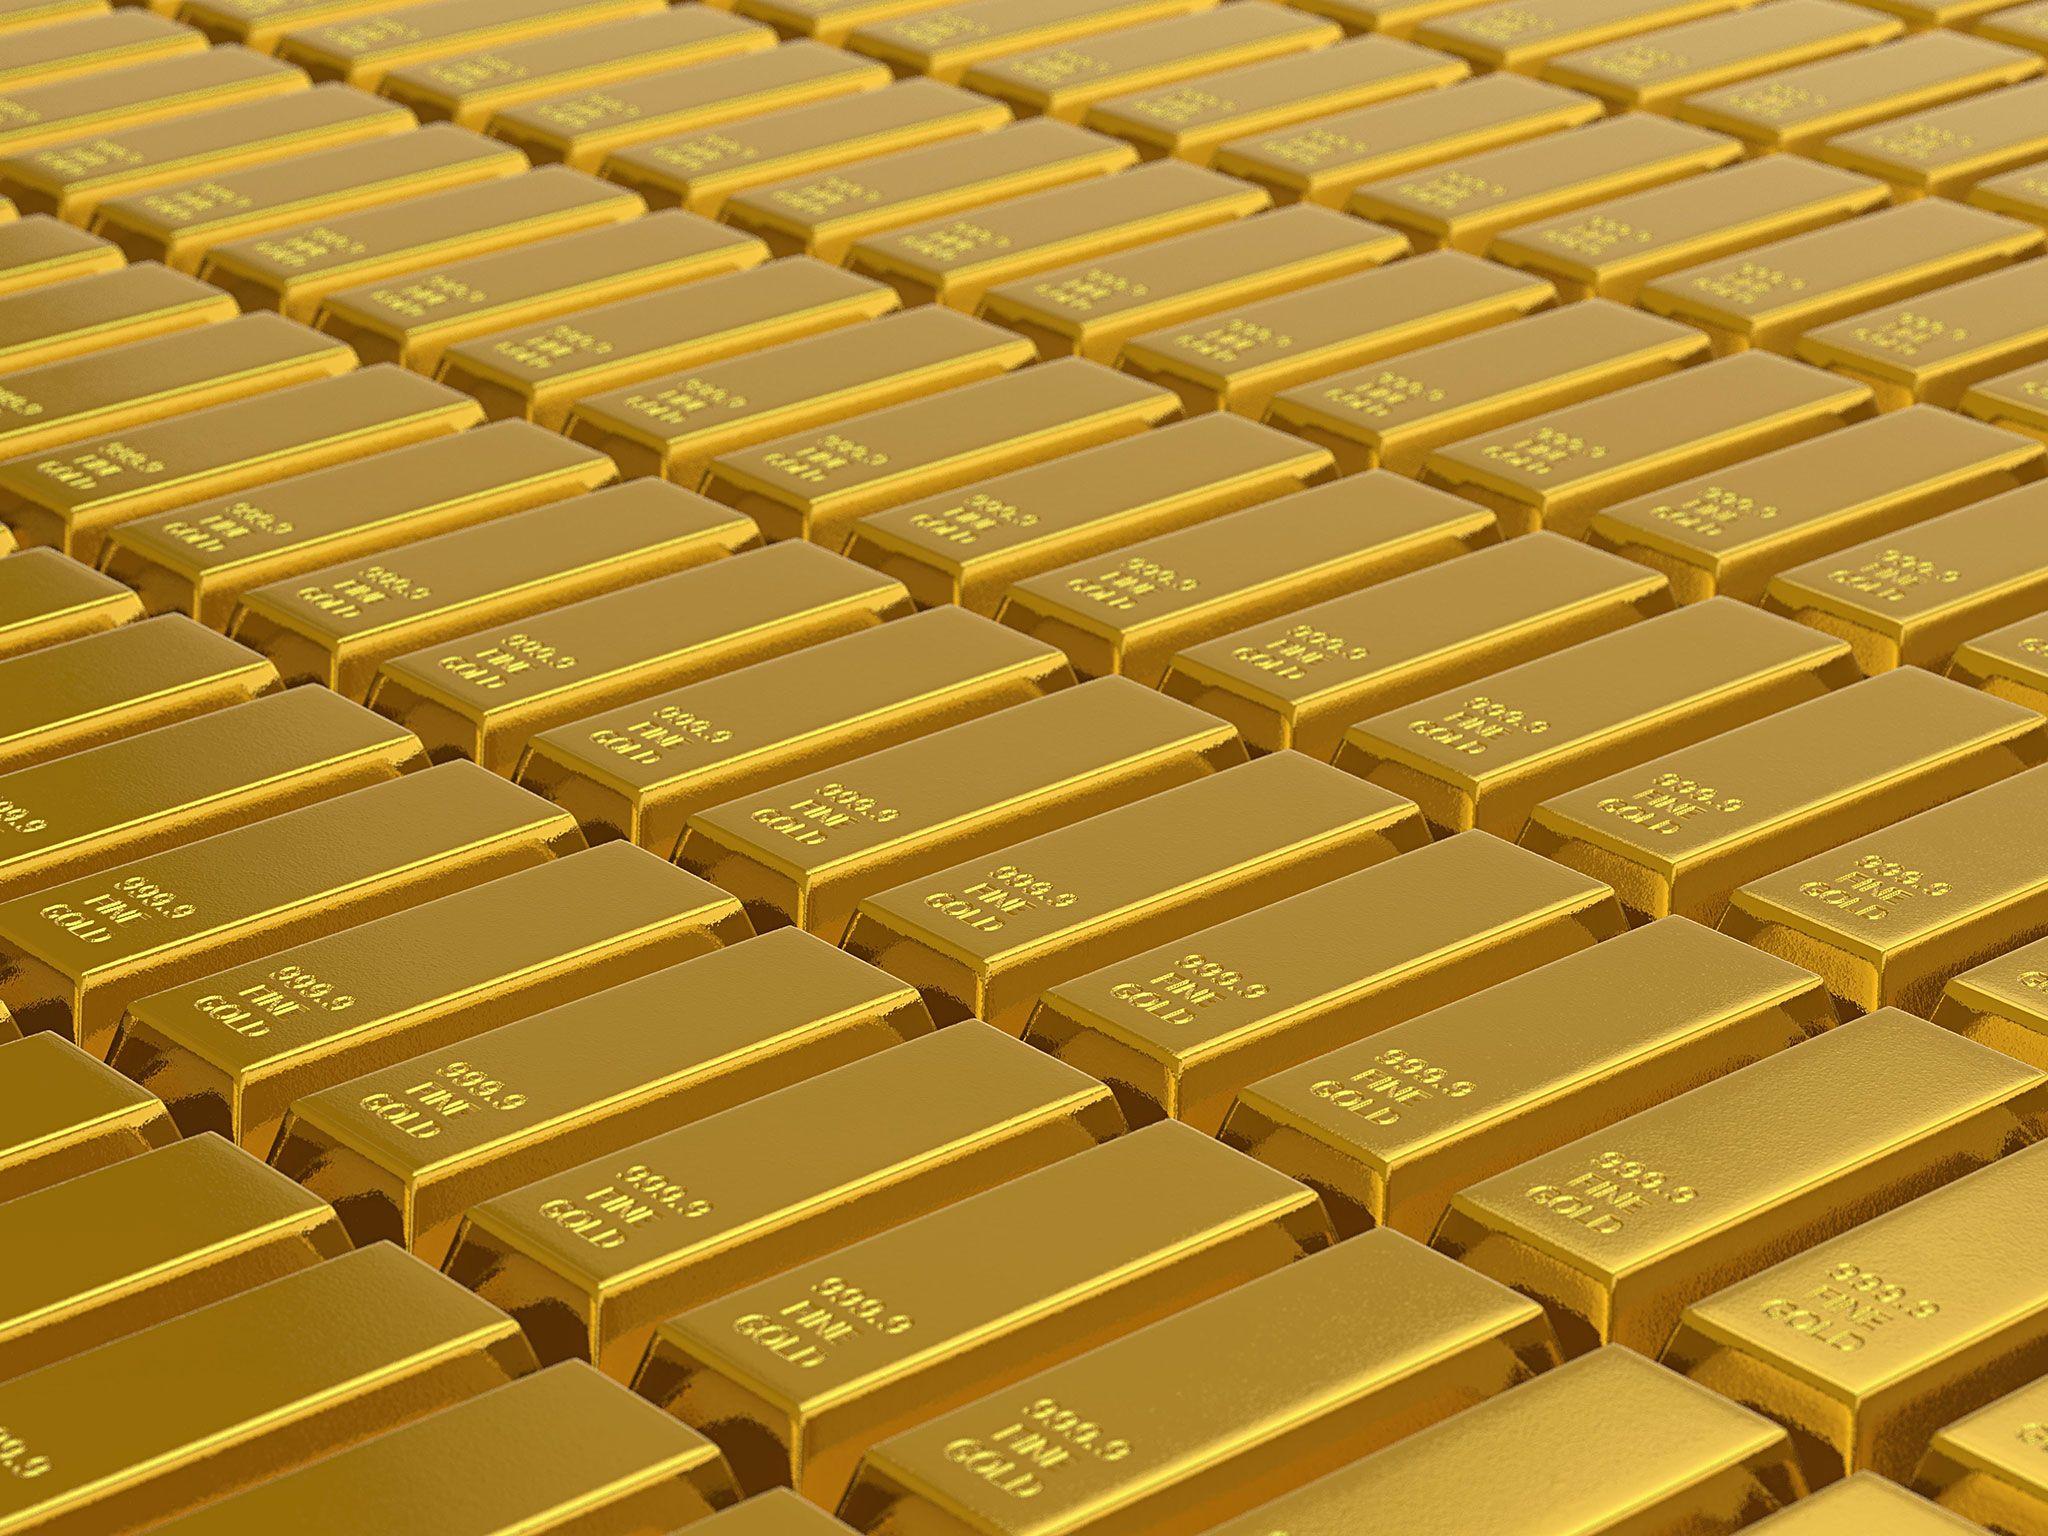 Gold could be used to treat cancer, scientists say. Radical